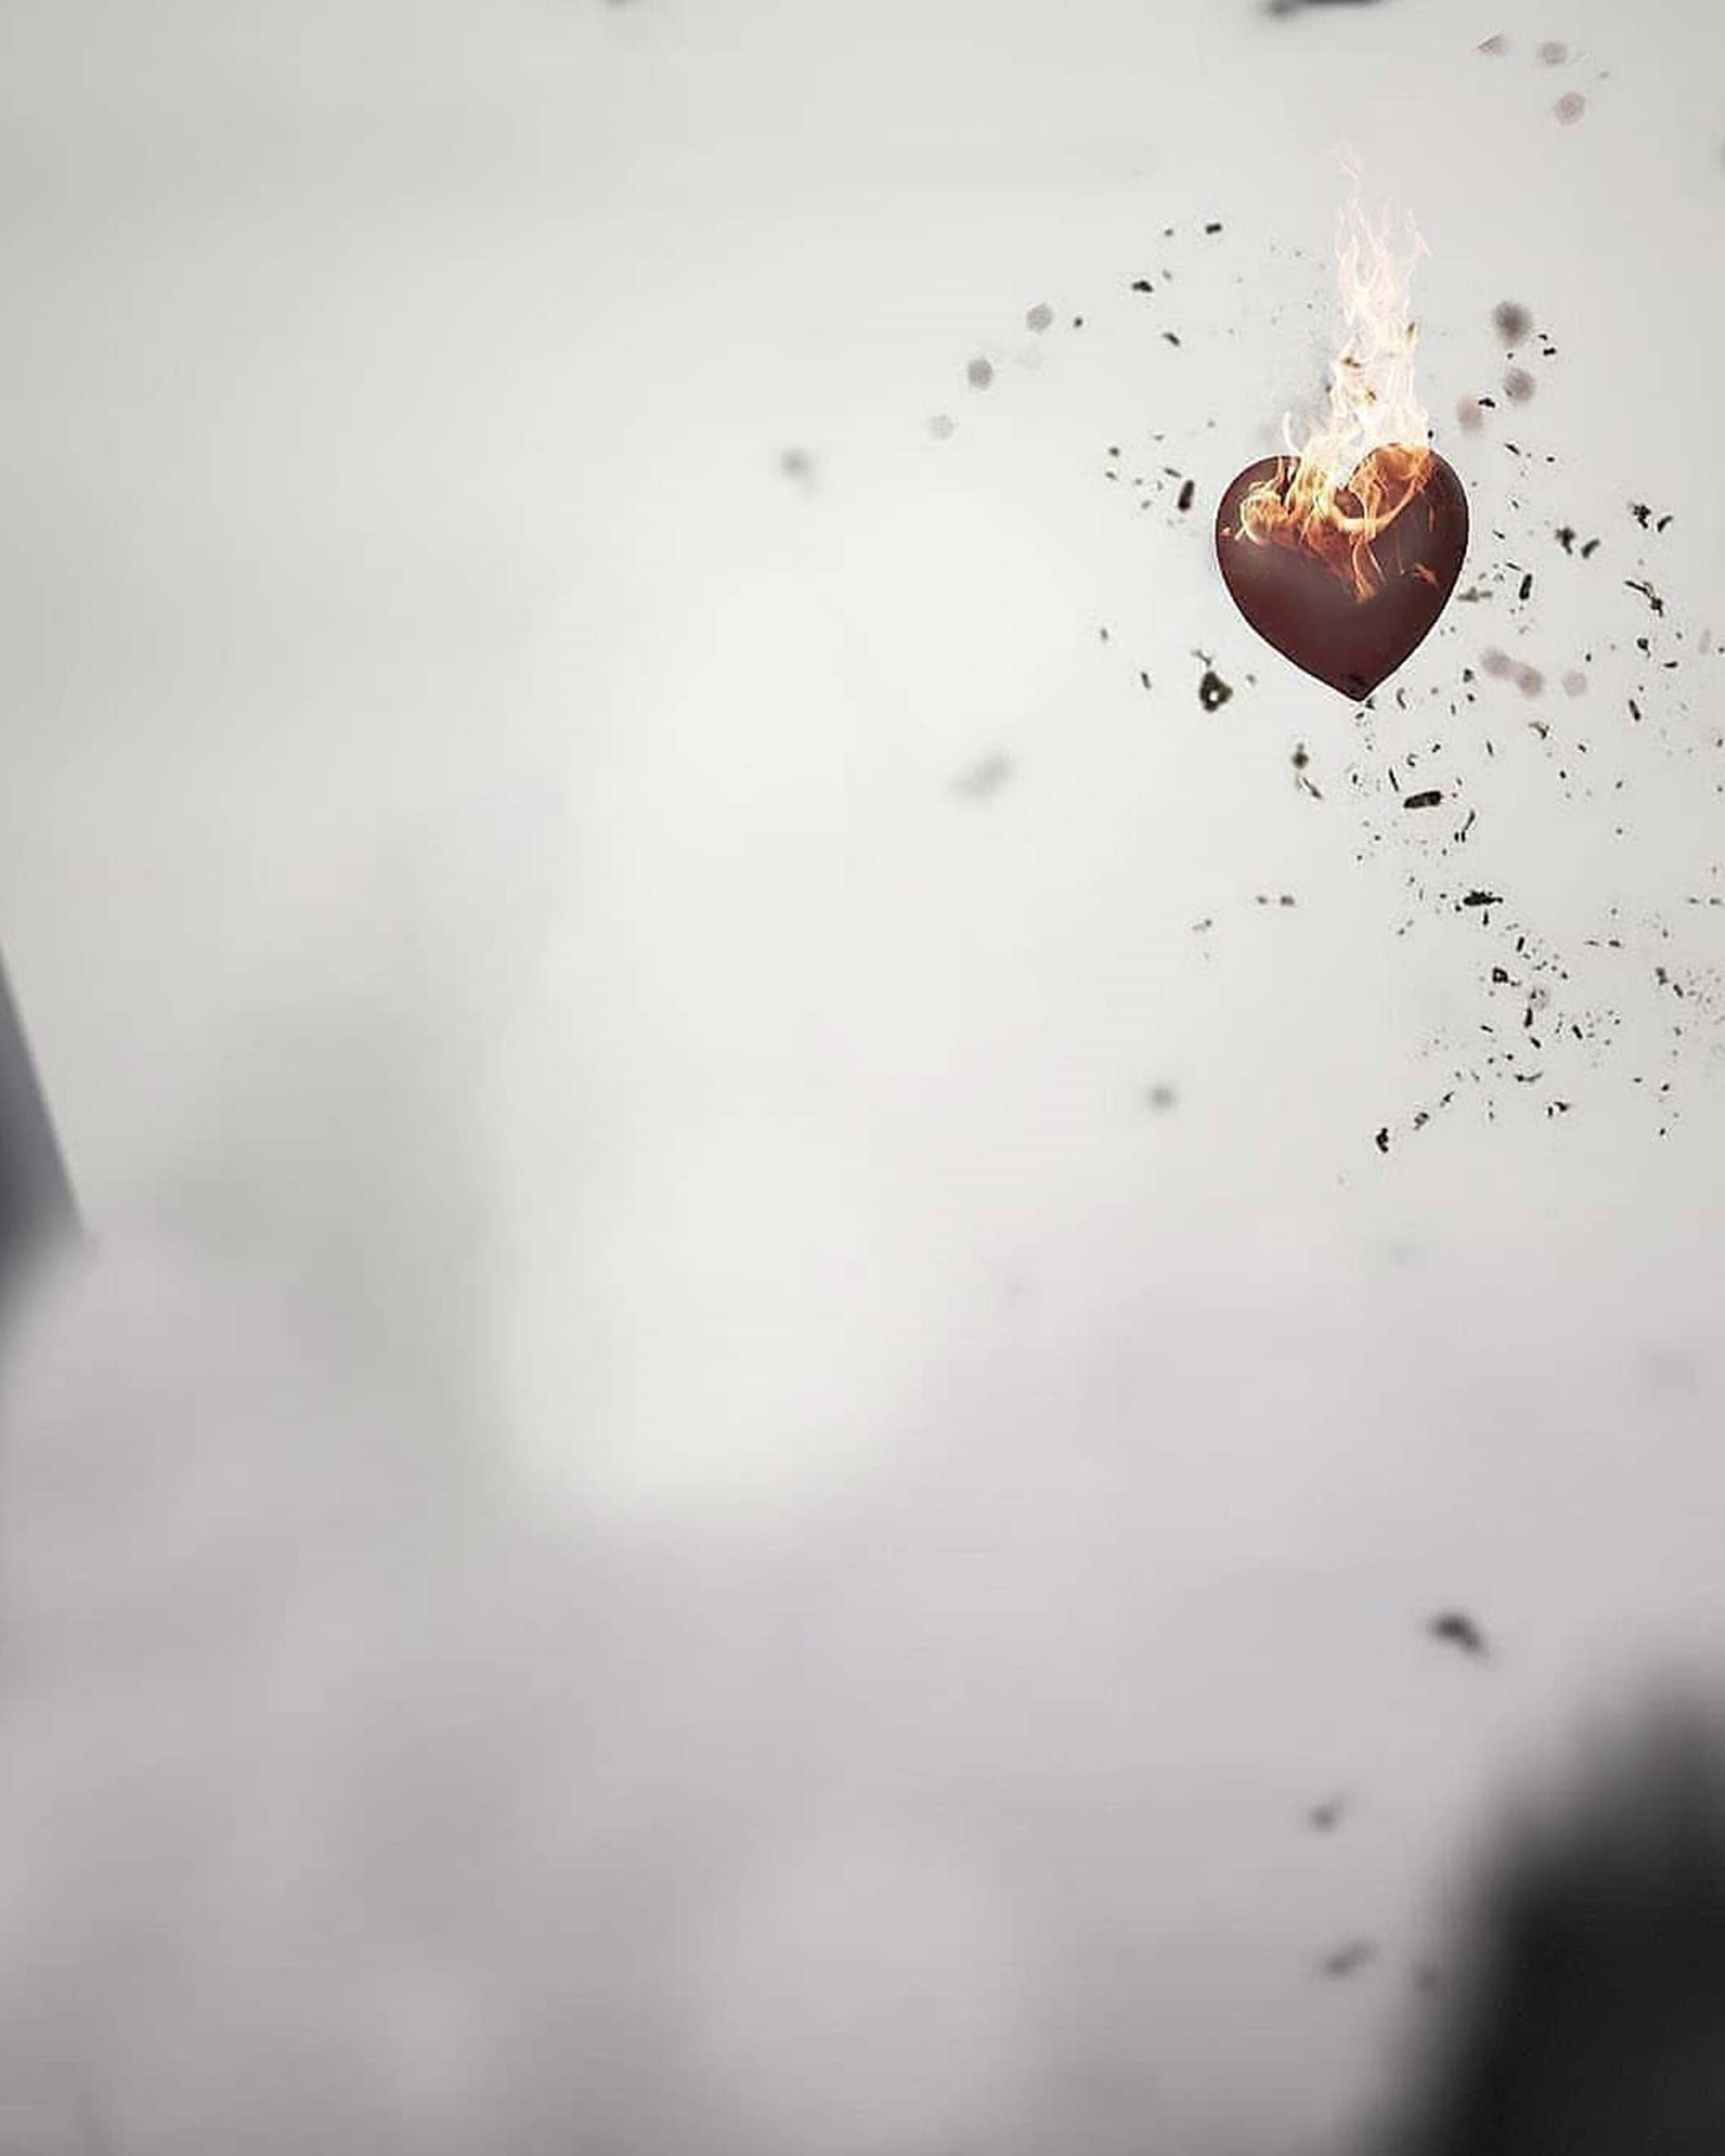 The Burning Heart White Snapseed Background Free Stock